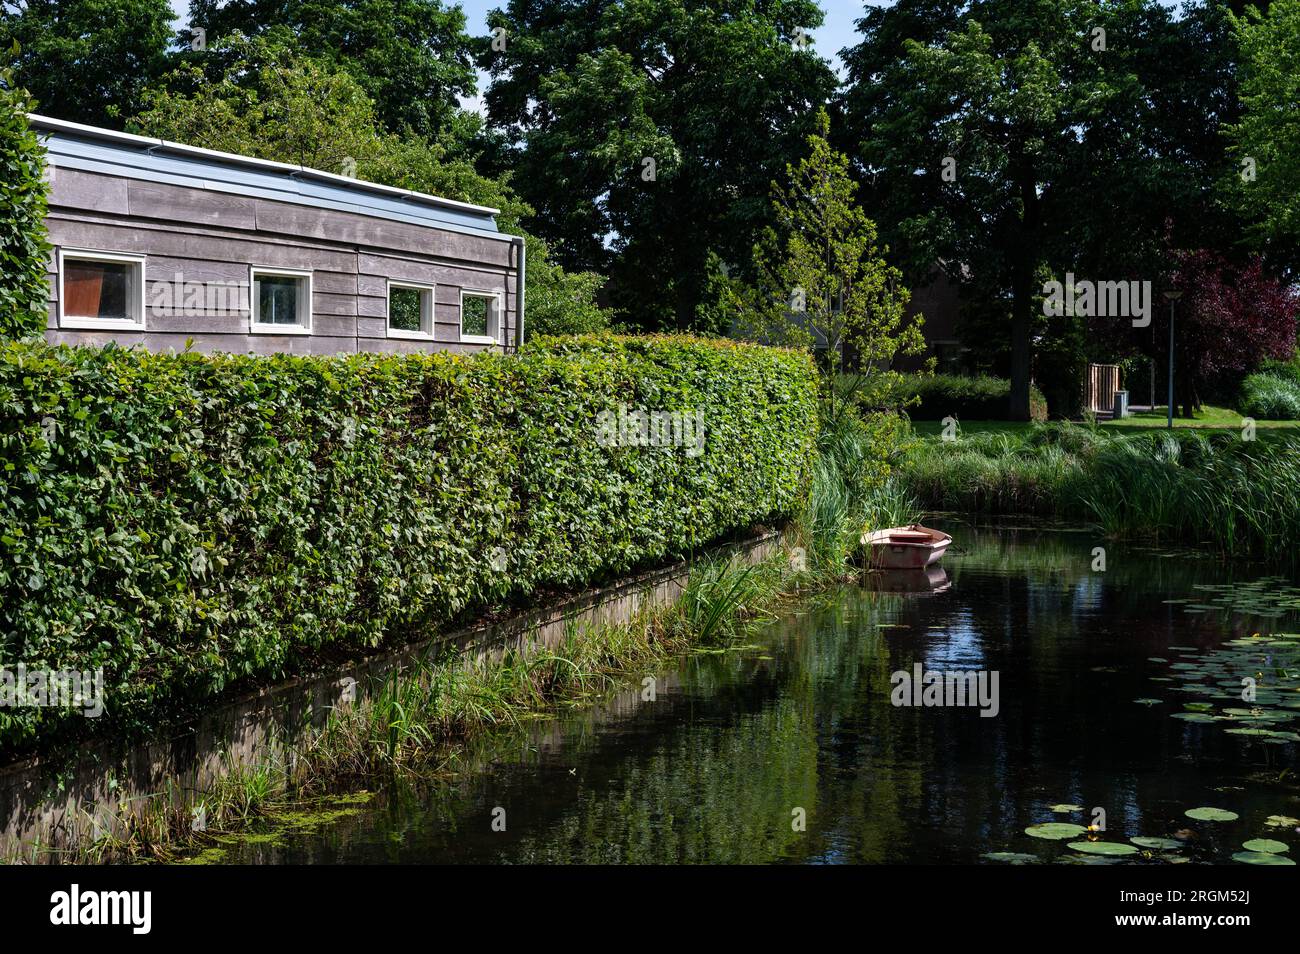 Wooden house and green creek as a background, Barendrecht, South Holland, The Netherlands Stock Photo